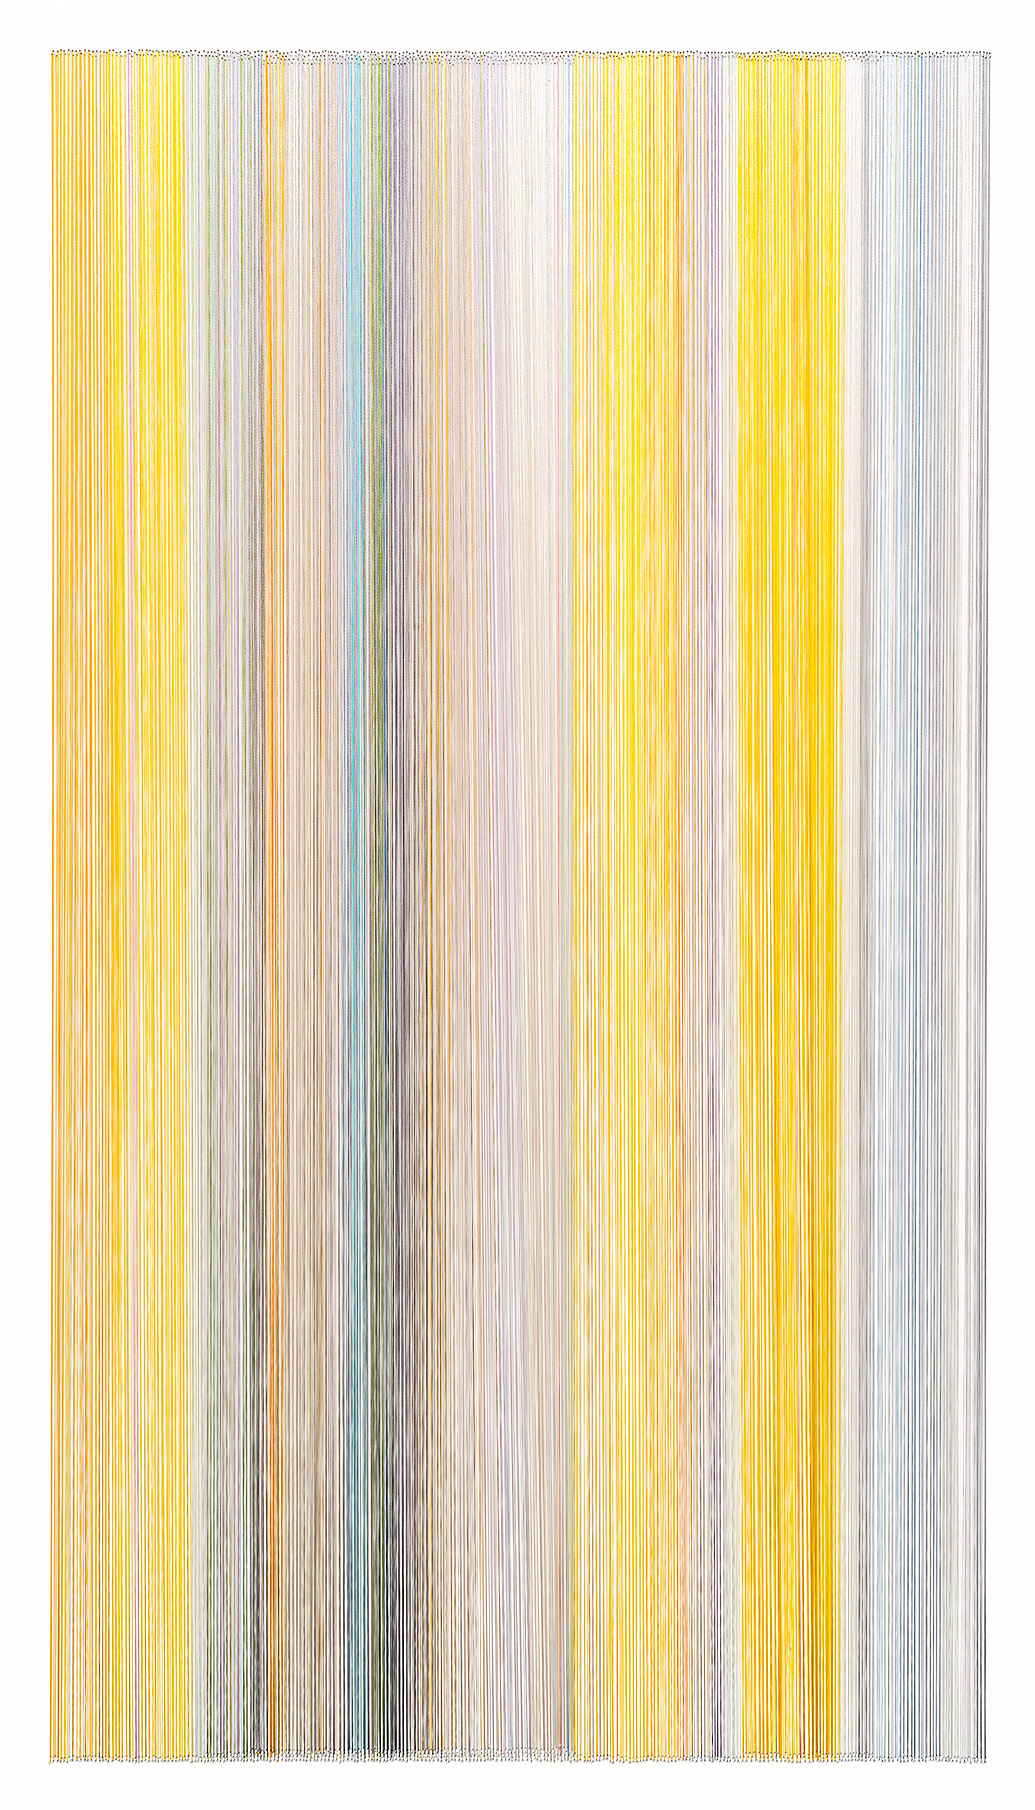    thread drawing 33   2014 rayon thread 42 x 24 inches Collection Stinson Law Firm, Kansas City, Missouri 